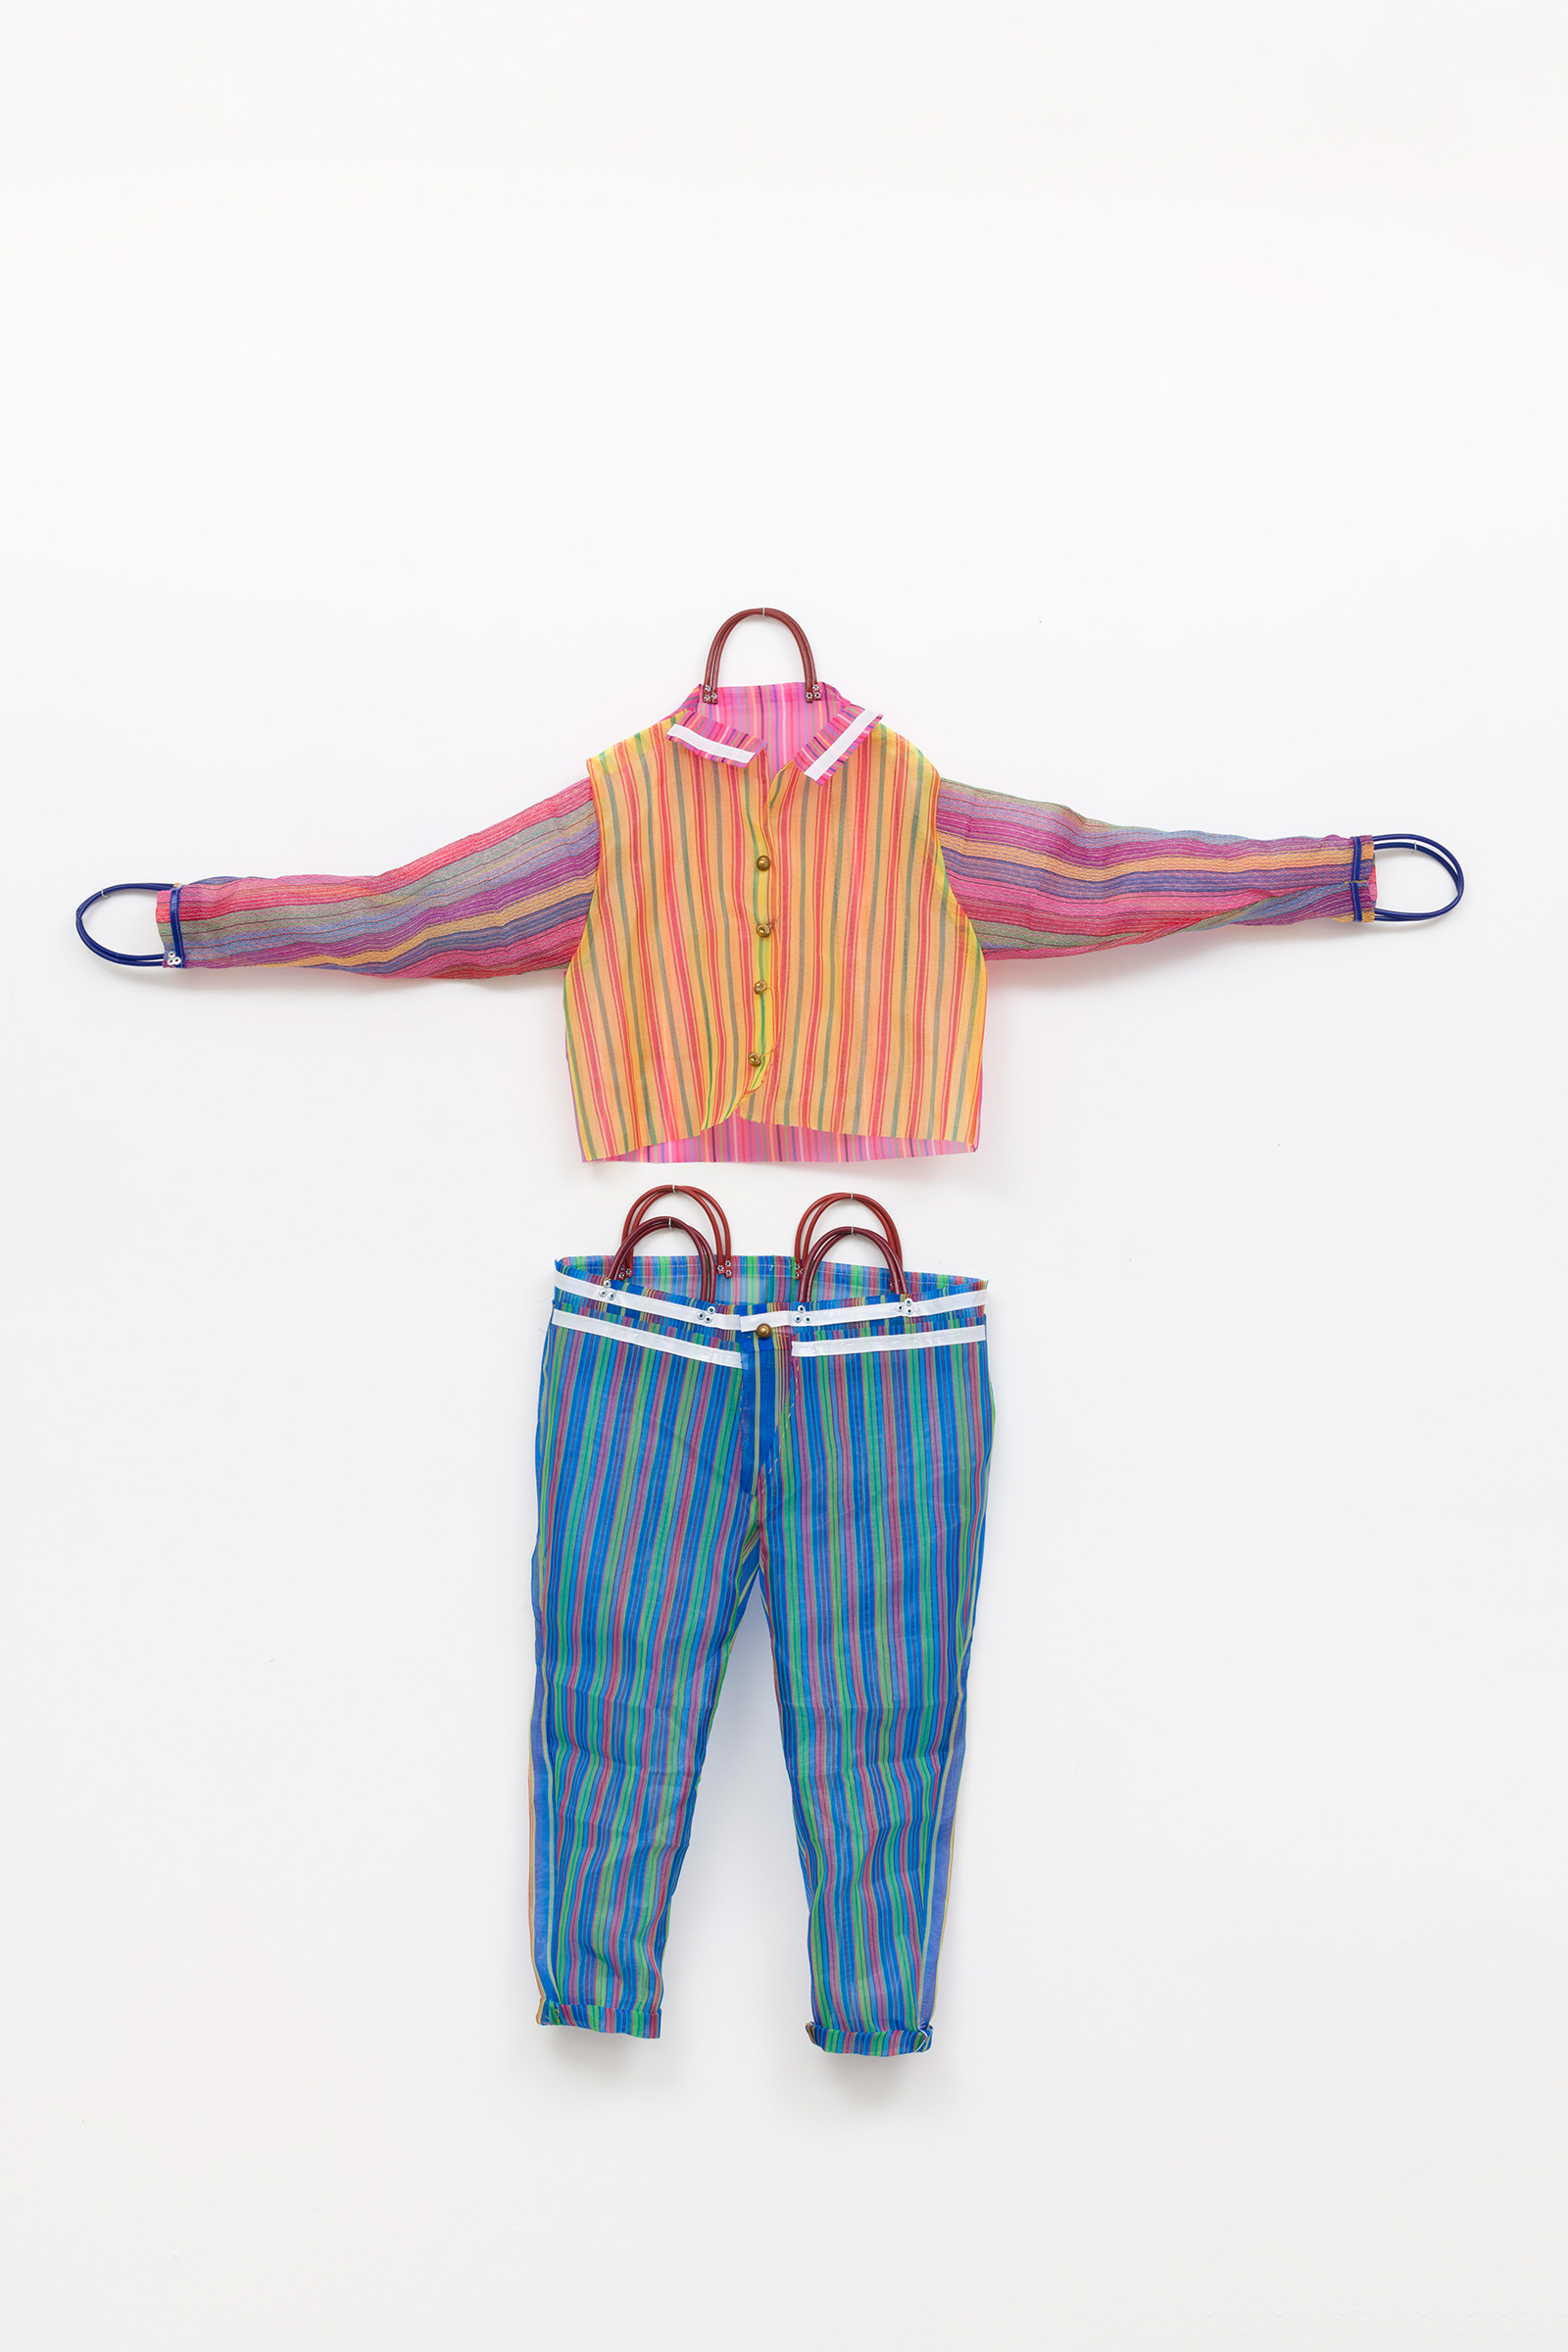 This photograph features a colorful two-piece outfit, including a pink and yellow button-up top and blue pants, both made from striped market bags. The handles of the bags are incorporated into the neckline and sleeves of the shirt and the waistband of the pants. The outfit appears against a simple white background.